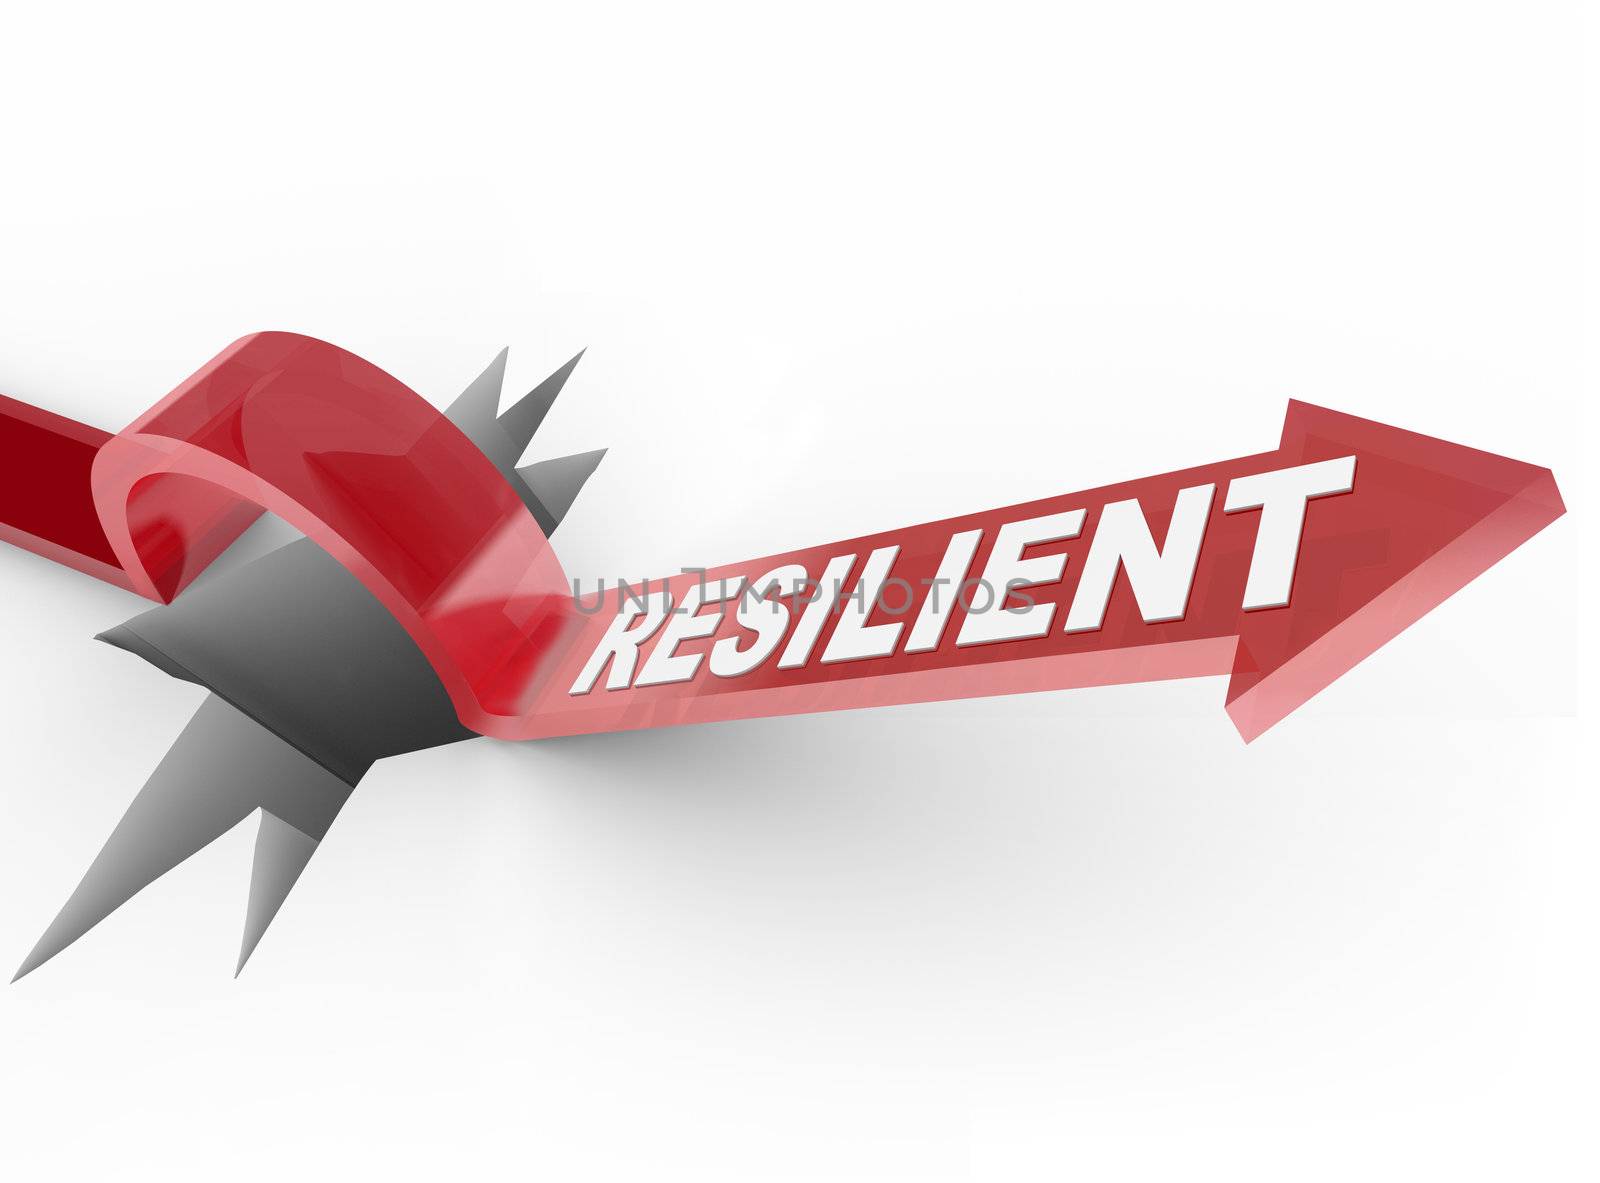 Resilient - Rising to Challenge and Overcoming a Problem by iQoncept